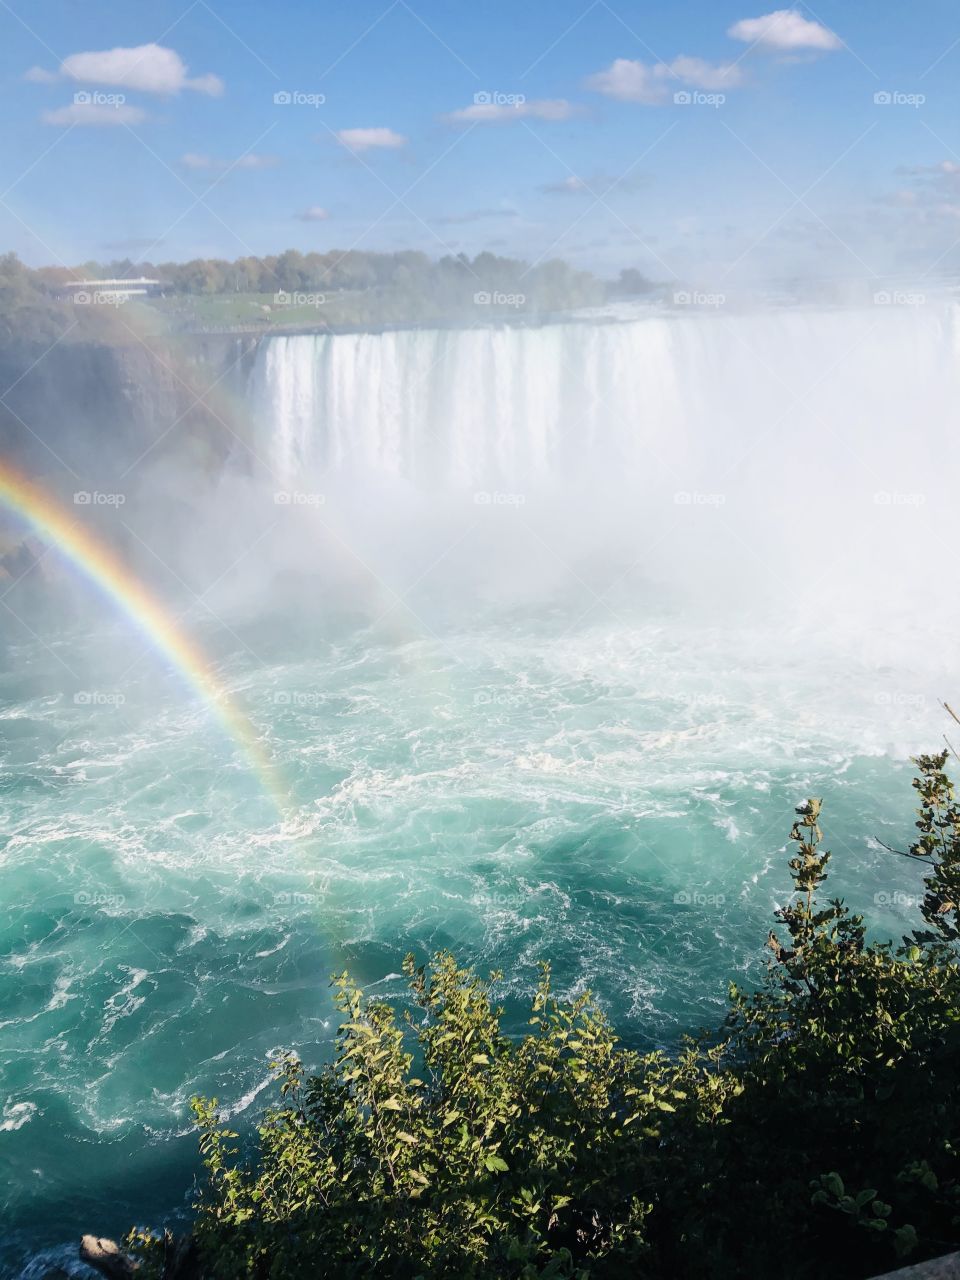 Greats view of a double rainbow and the beautiful falls of Niagara 